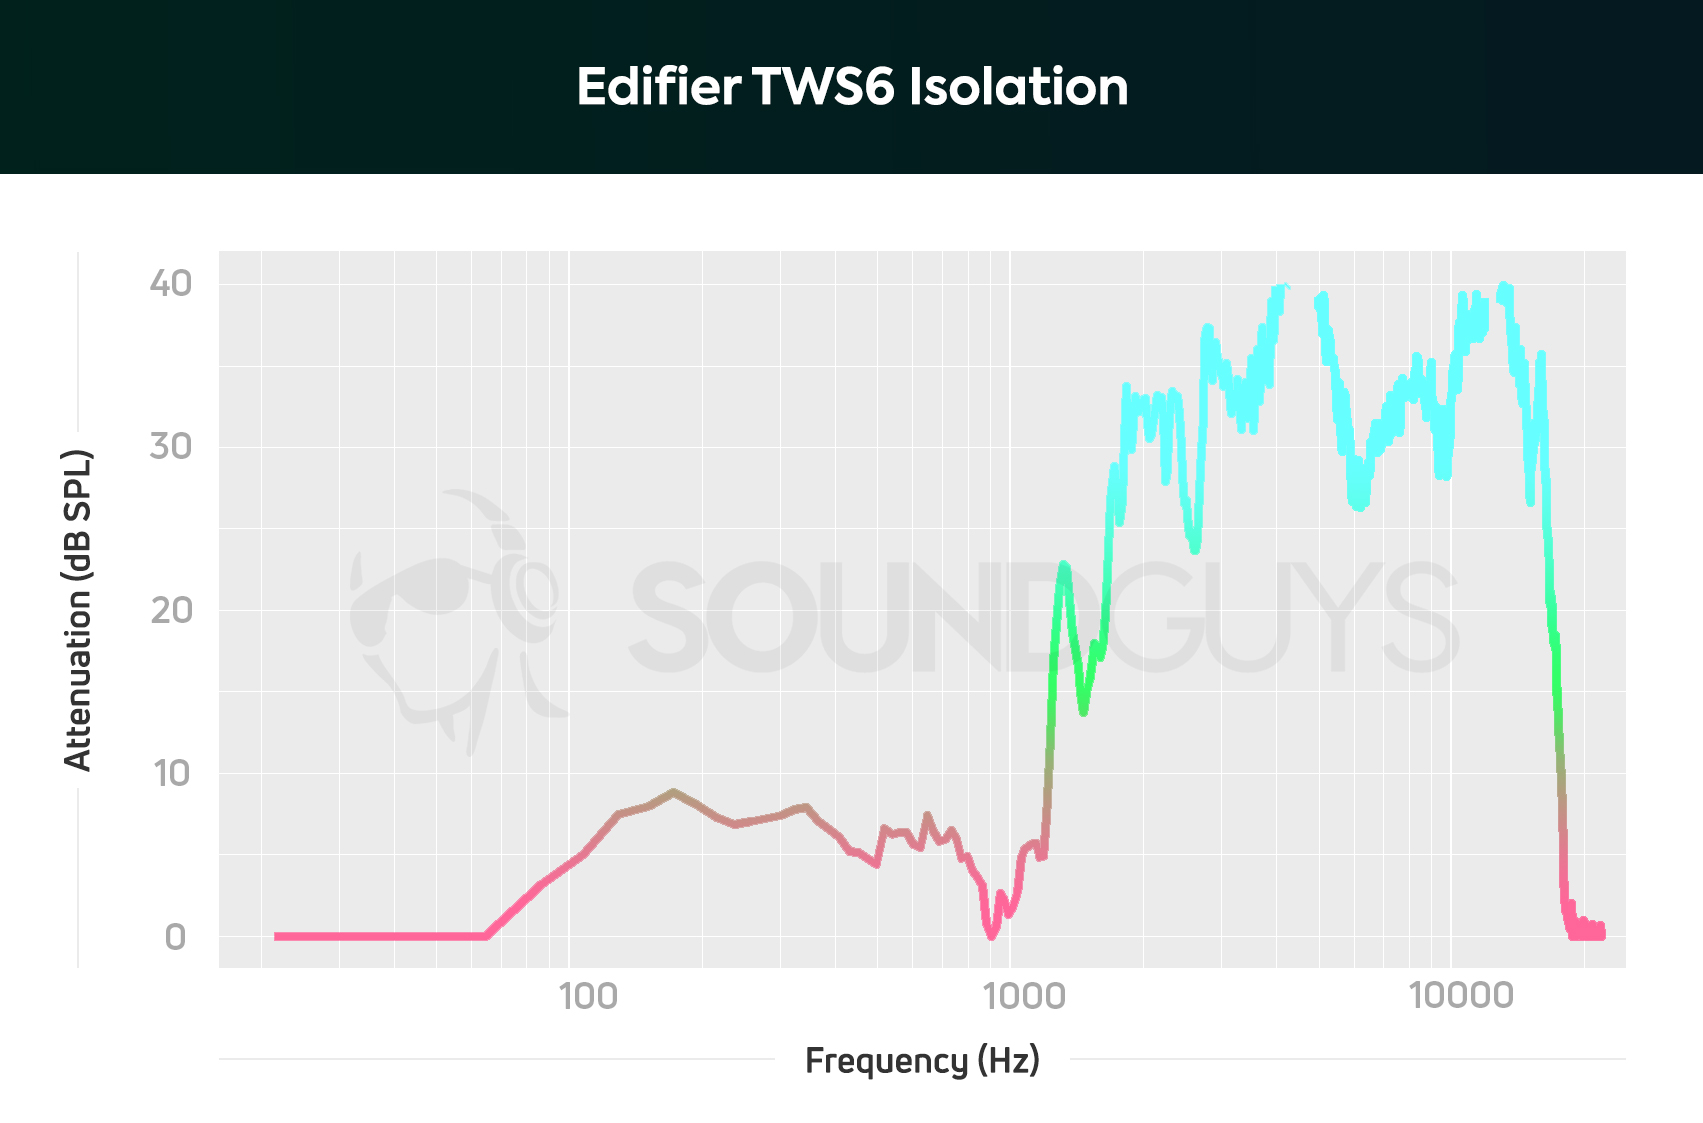 A chart depicts the Edifier TWS6 true wireless earbuds' isolation performance, showing that low-frequency sounds are somewhat filtered out when a proper fit is achieved.